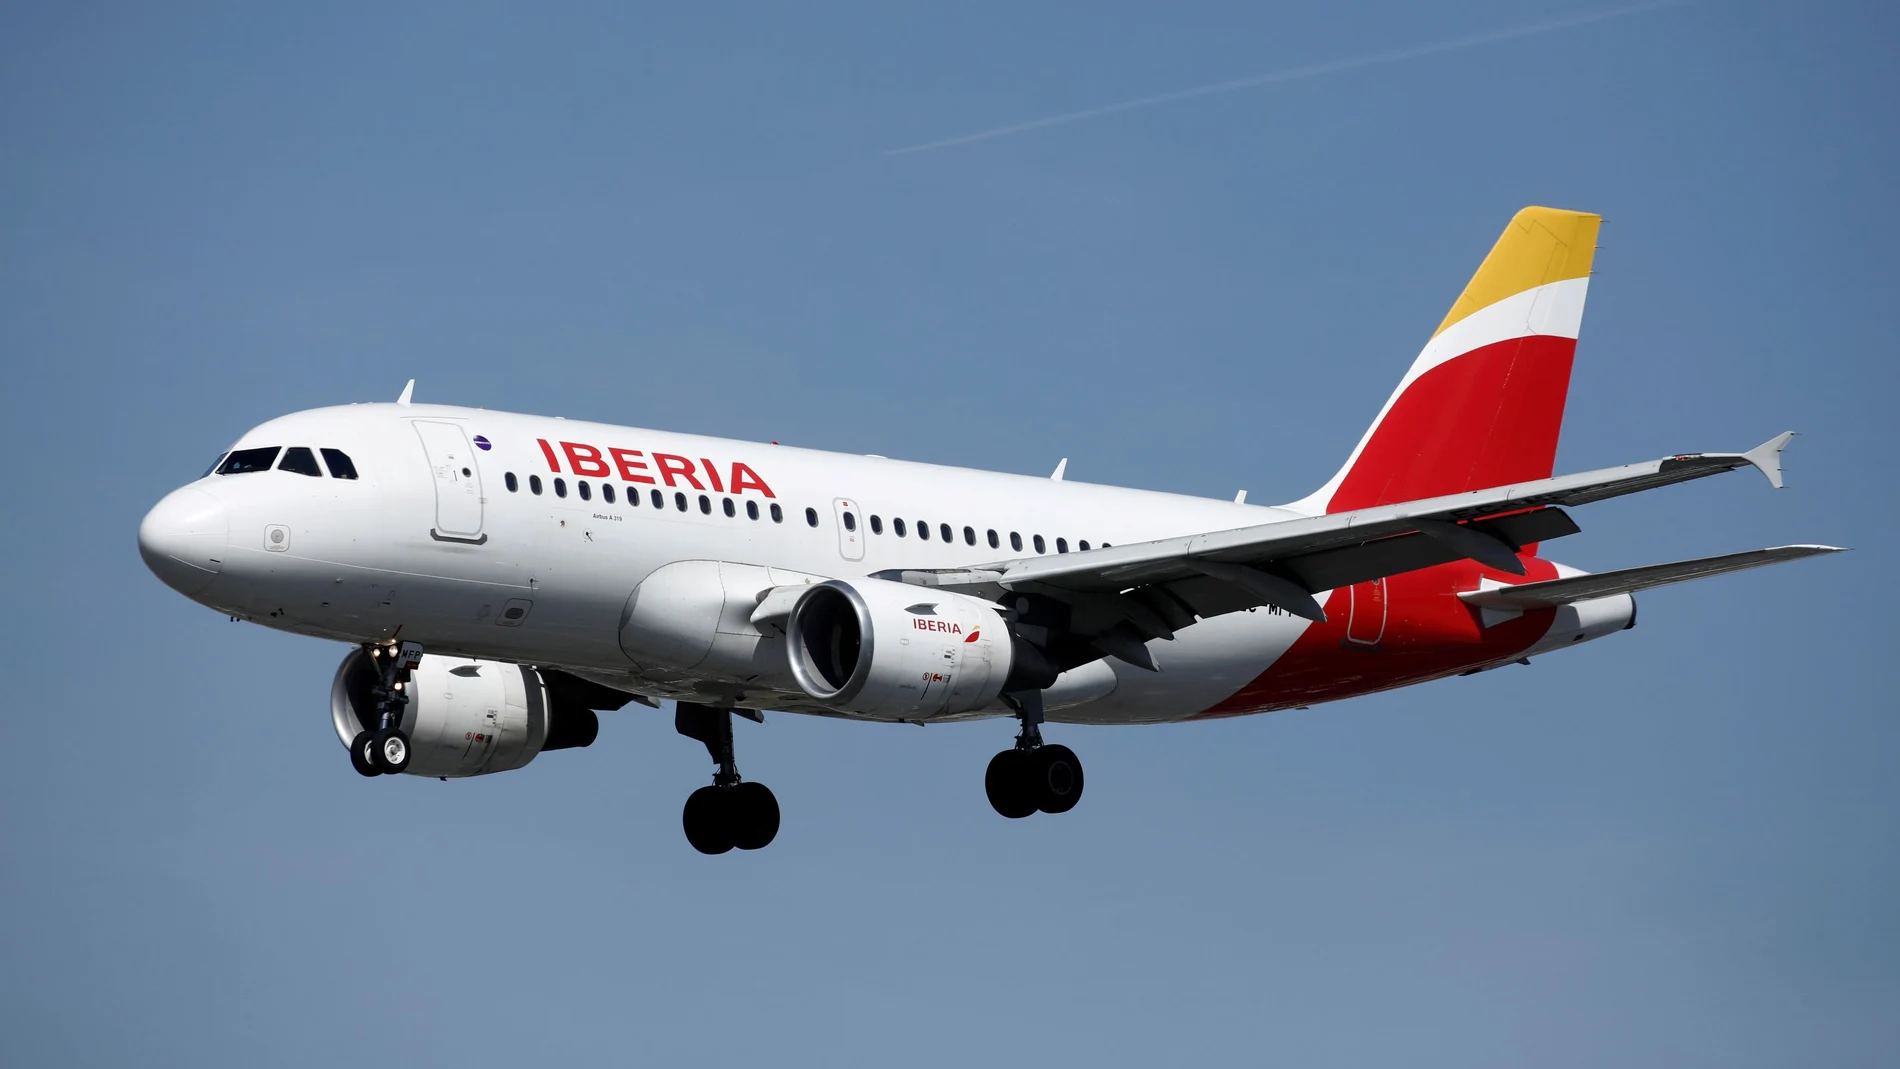 FILE PHOTO: An Airbus A319 aircraft, operated by Iberia, lands at Orly Airport near Paris